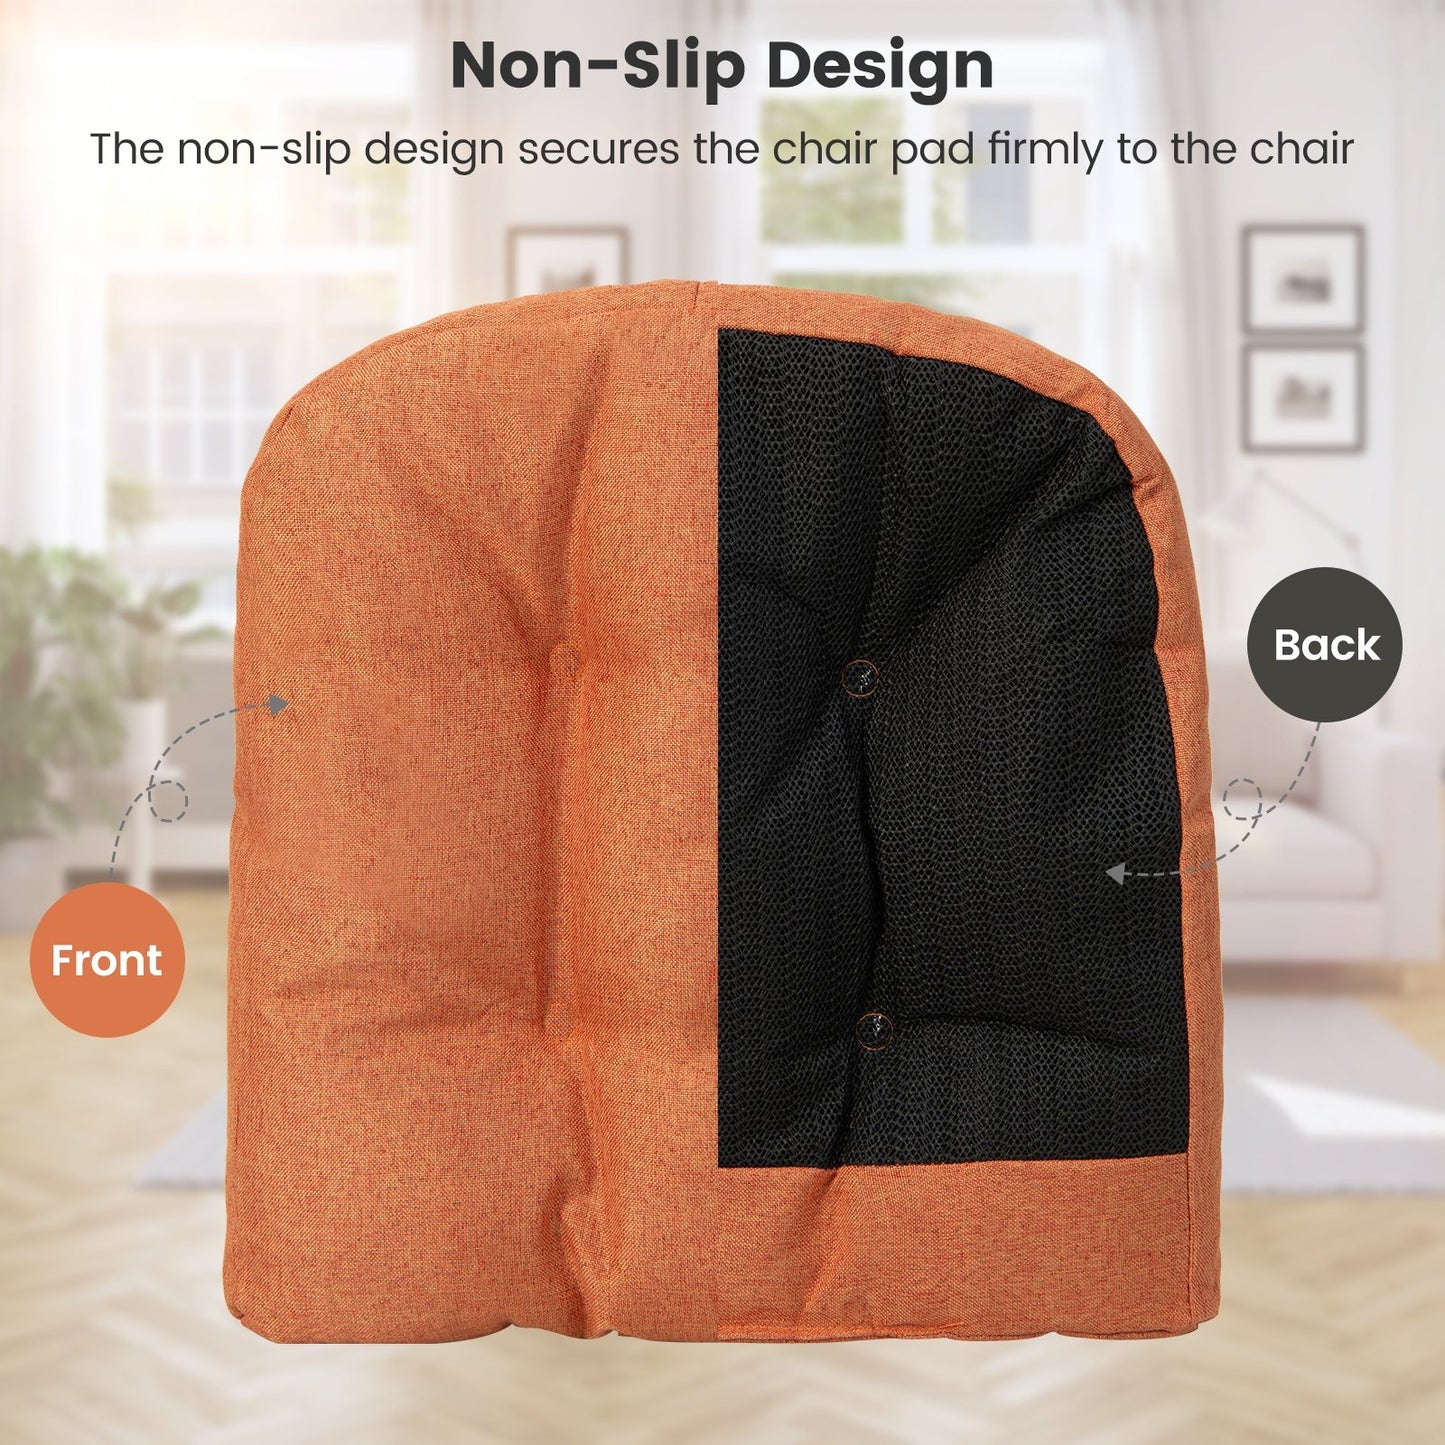 4 Pack 17.5 x 17 Inch U-Shaped Chair Pads with Polyester Cover, Orange - Gallery Canada